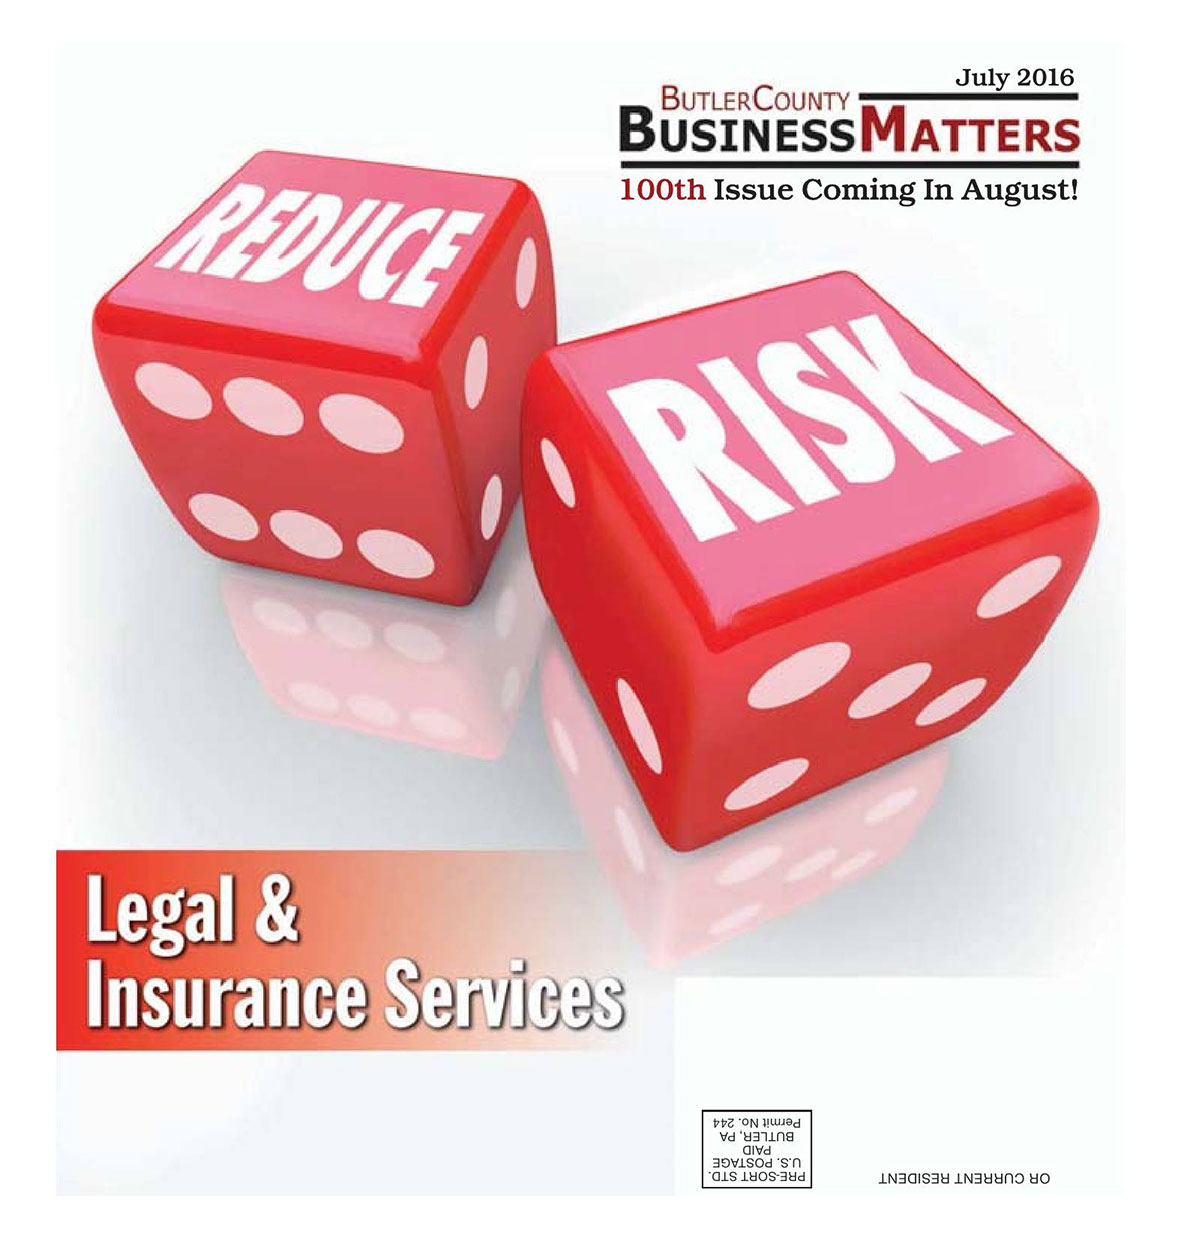 July 2016 - Reduce Risk - Legal & Insurance Services